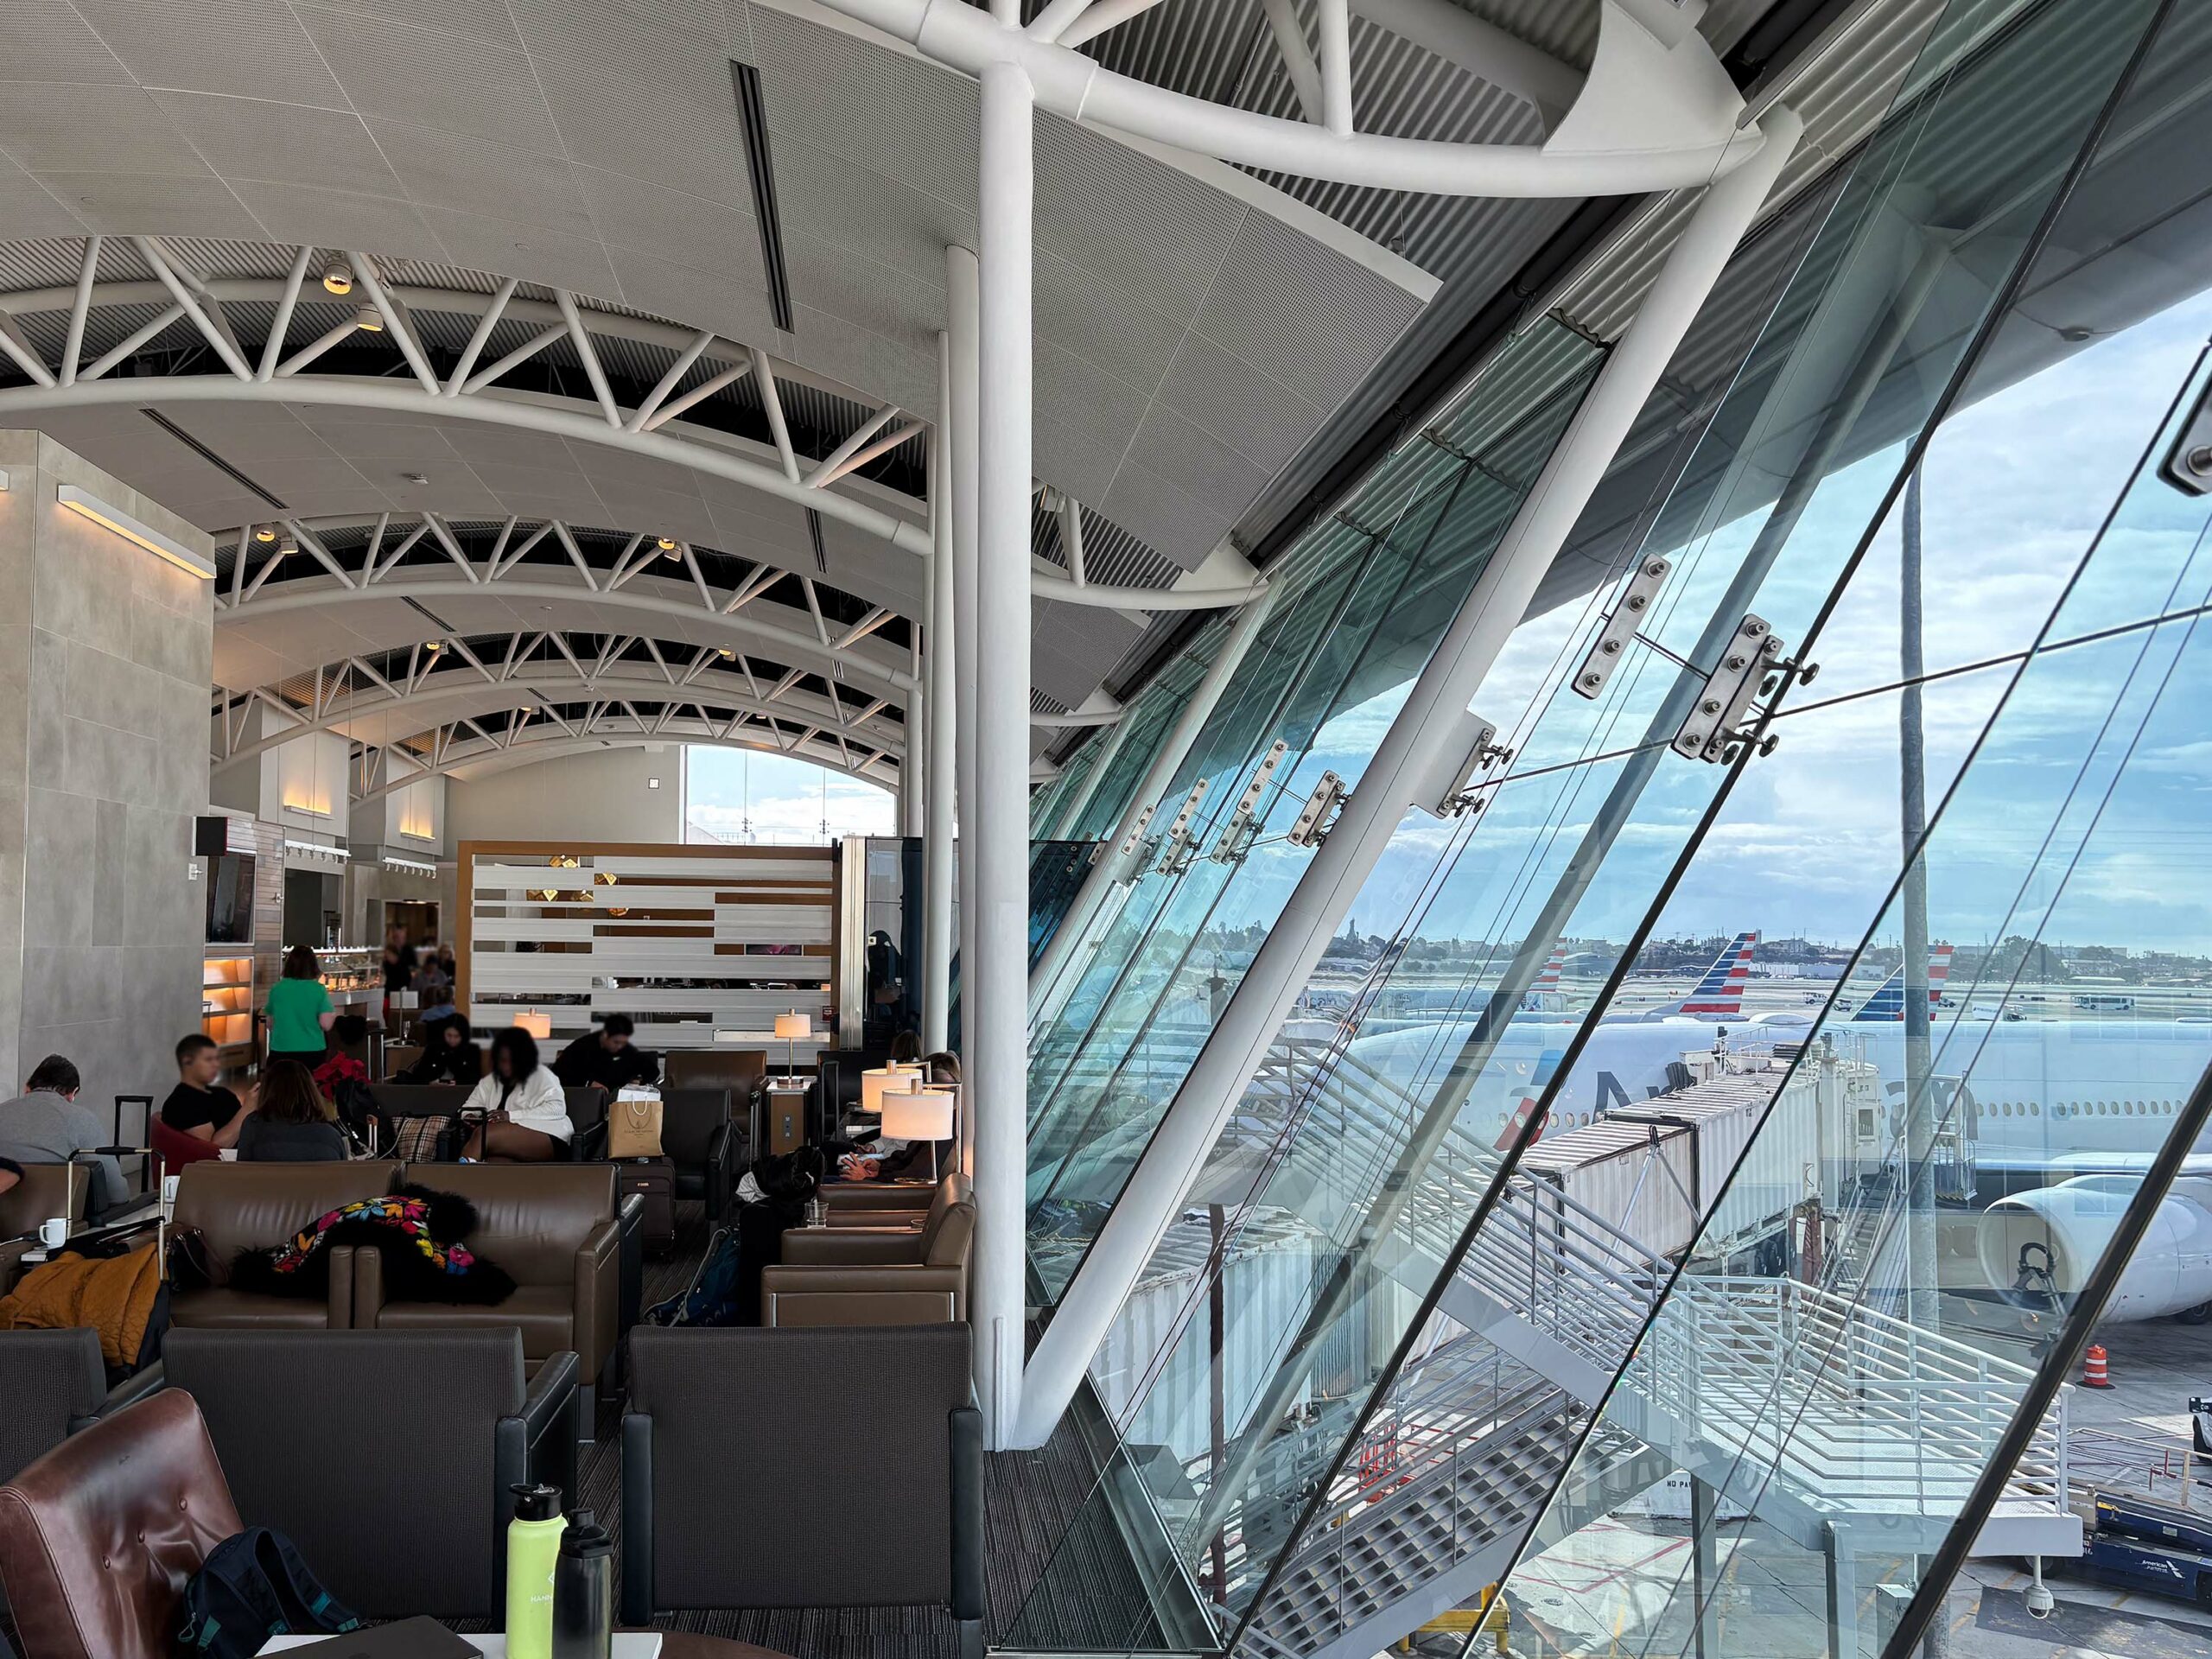 Review: American Airlines Flagship Lounge Los Angeles (LAX)